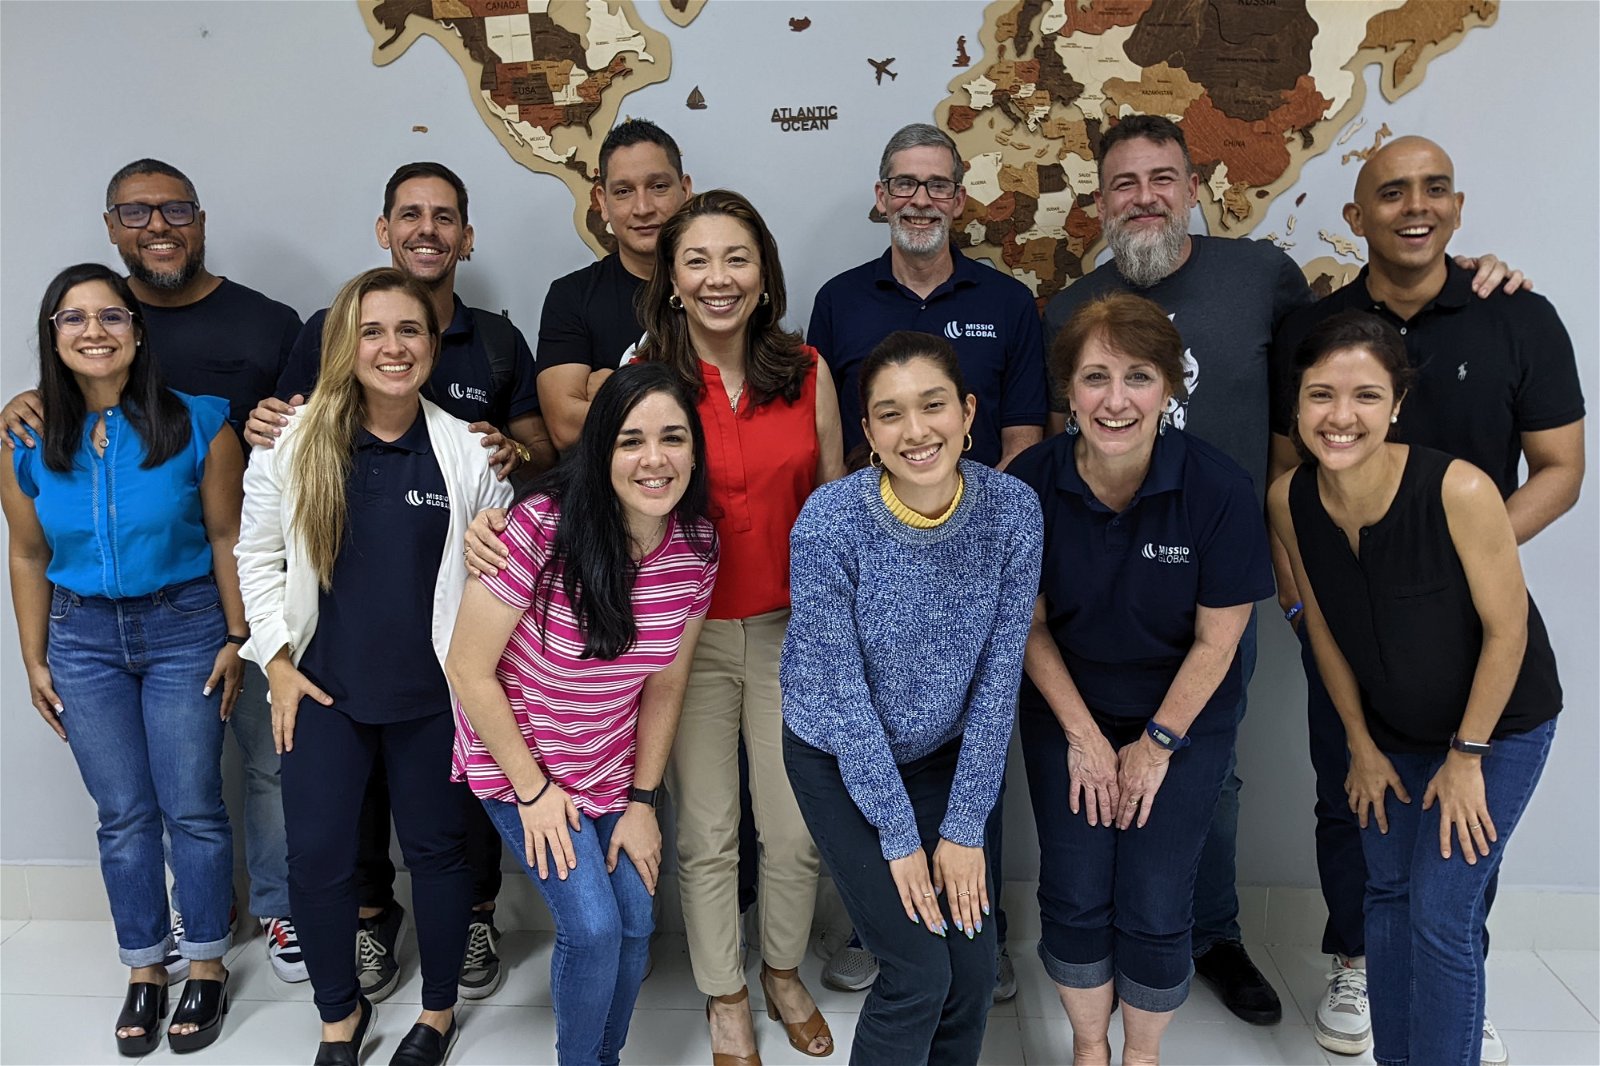 Missio Global group in front of a world map